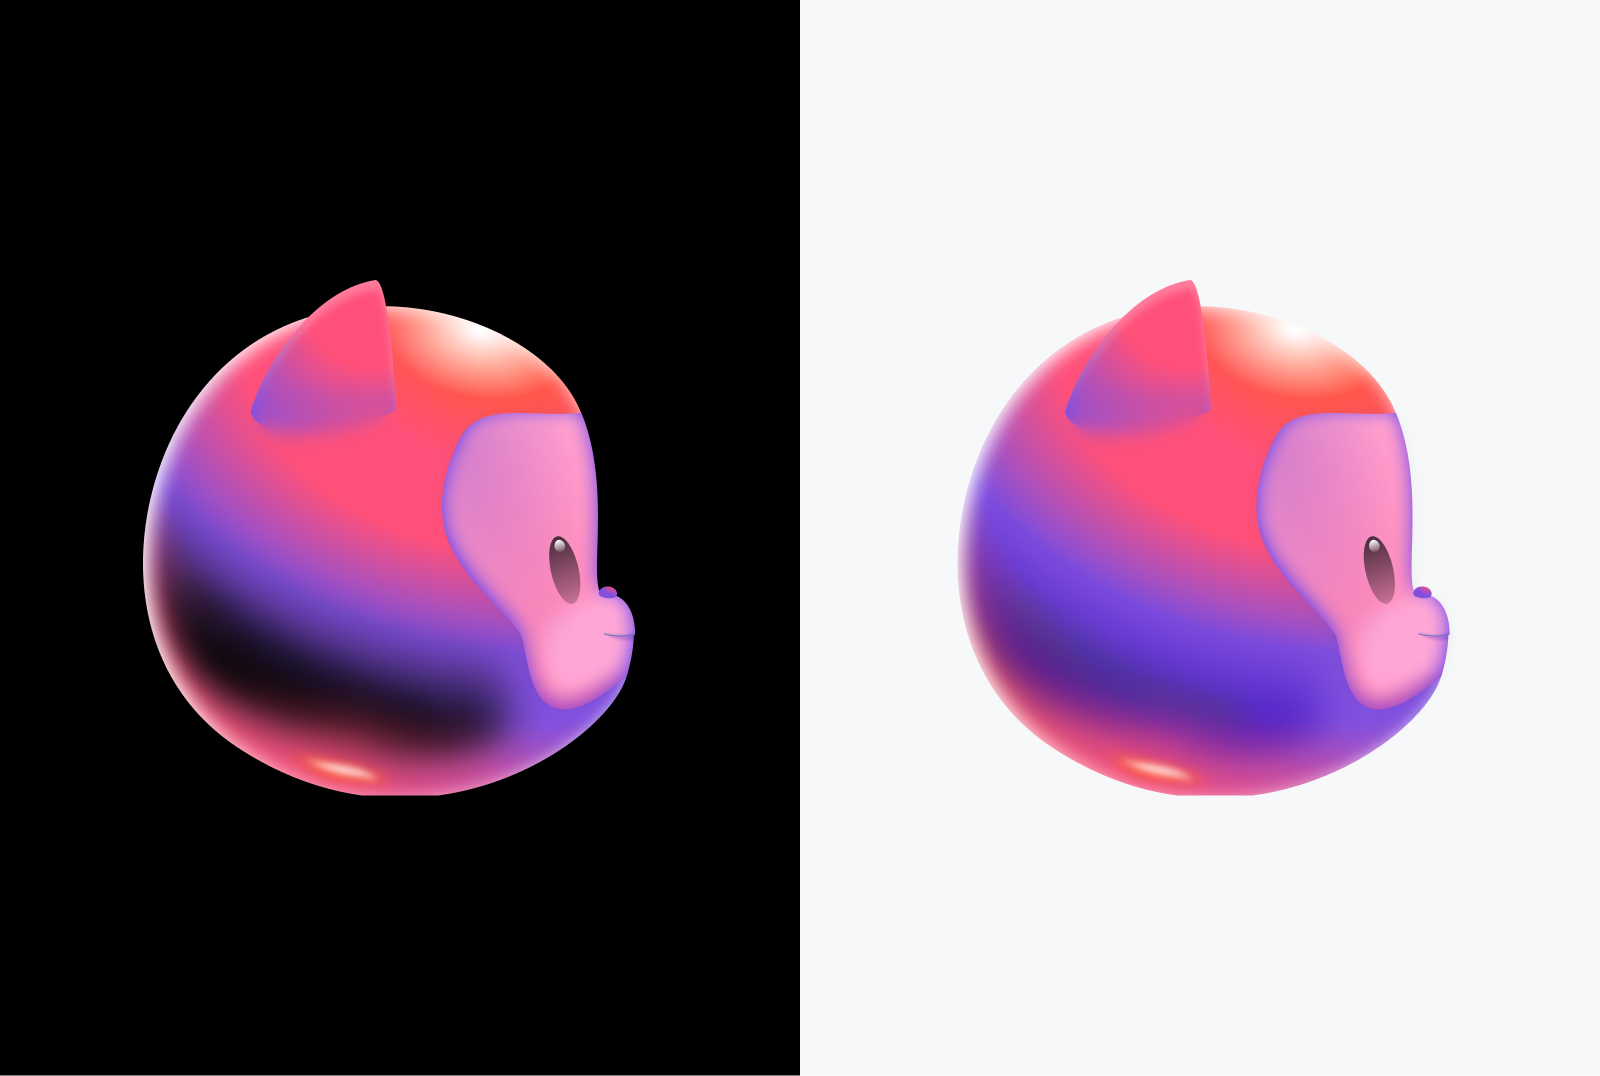 Two octocat illustrations on light and dark backgrounds showing the difference in rendering between color modes